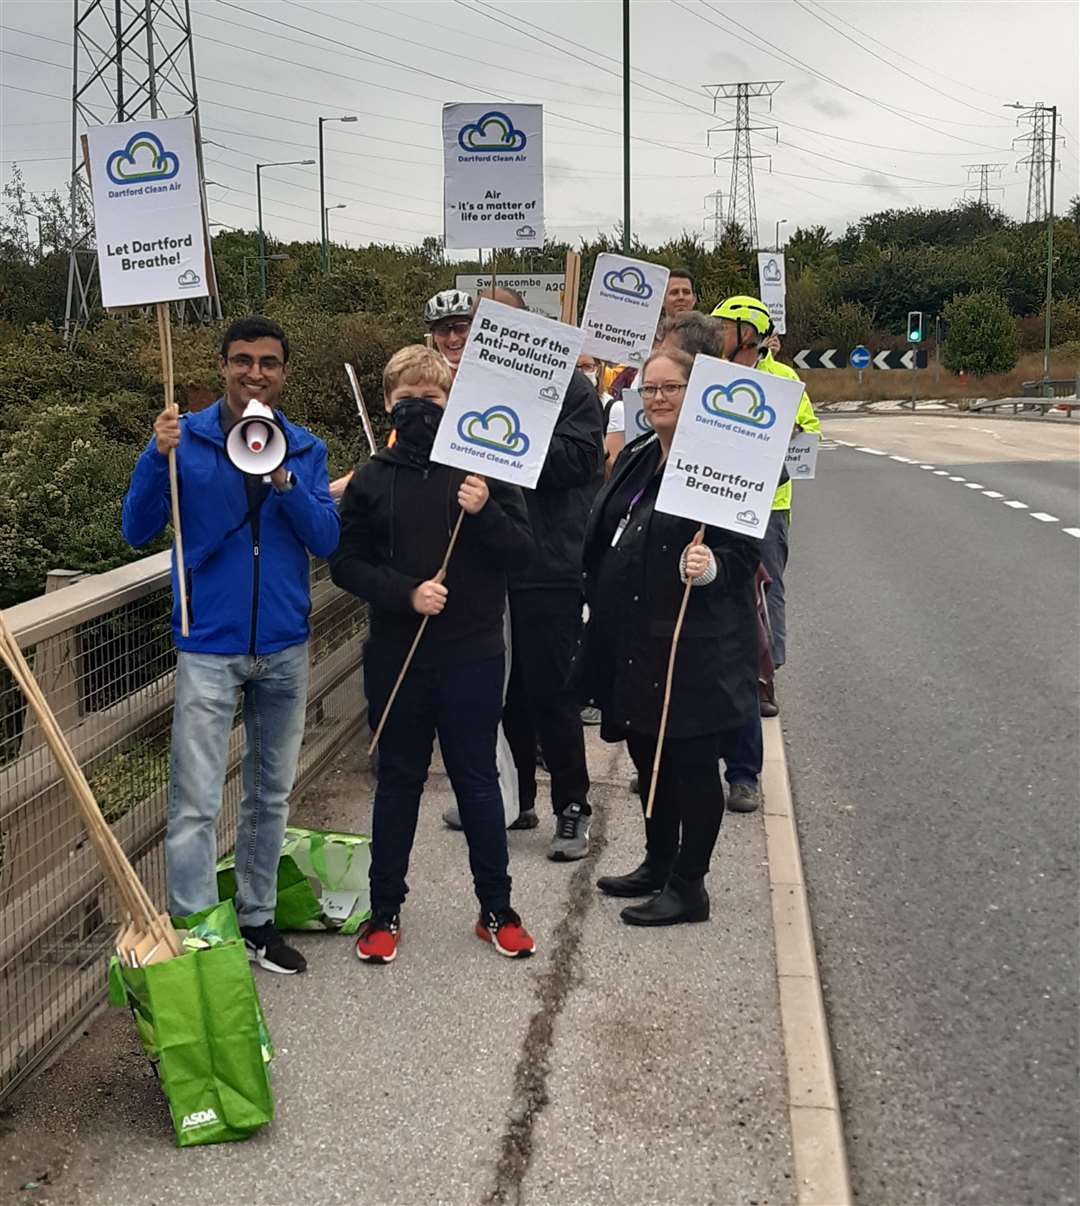 The Dartford Clean Air Coalition was set up in response to air pollution issues.